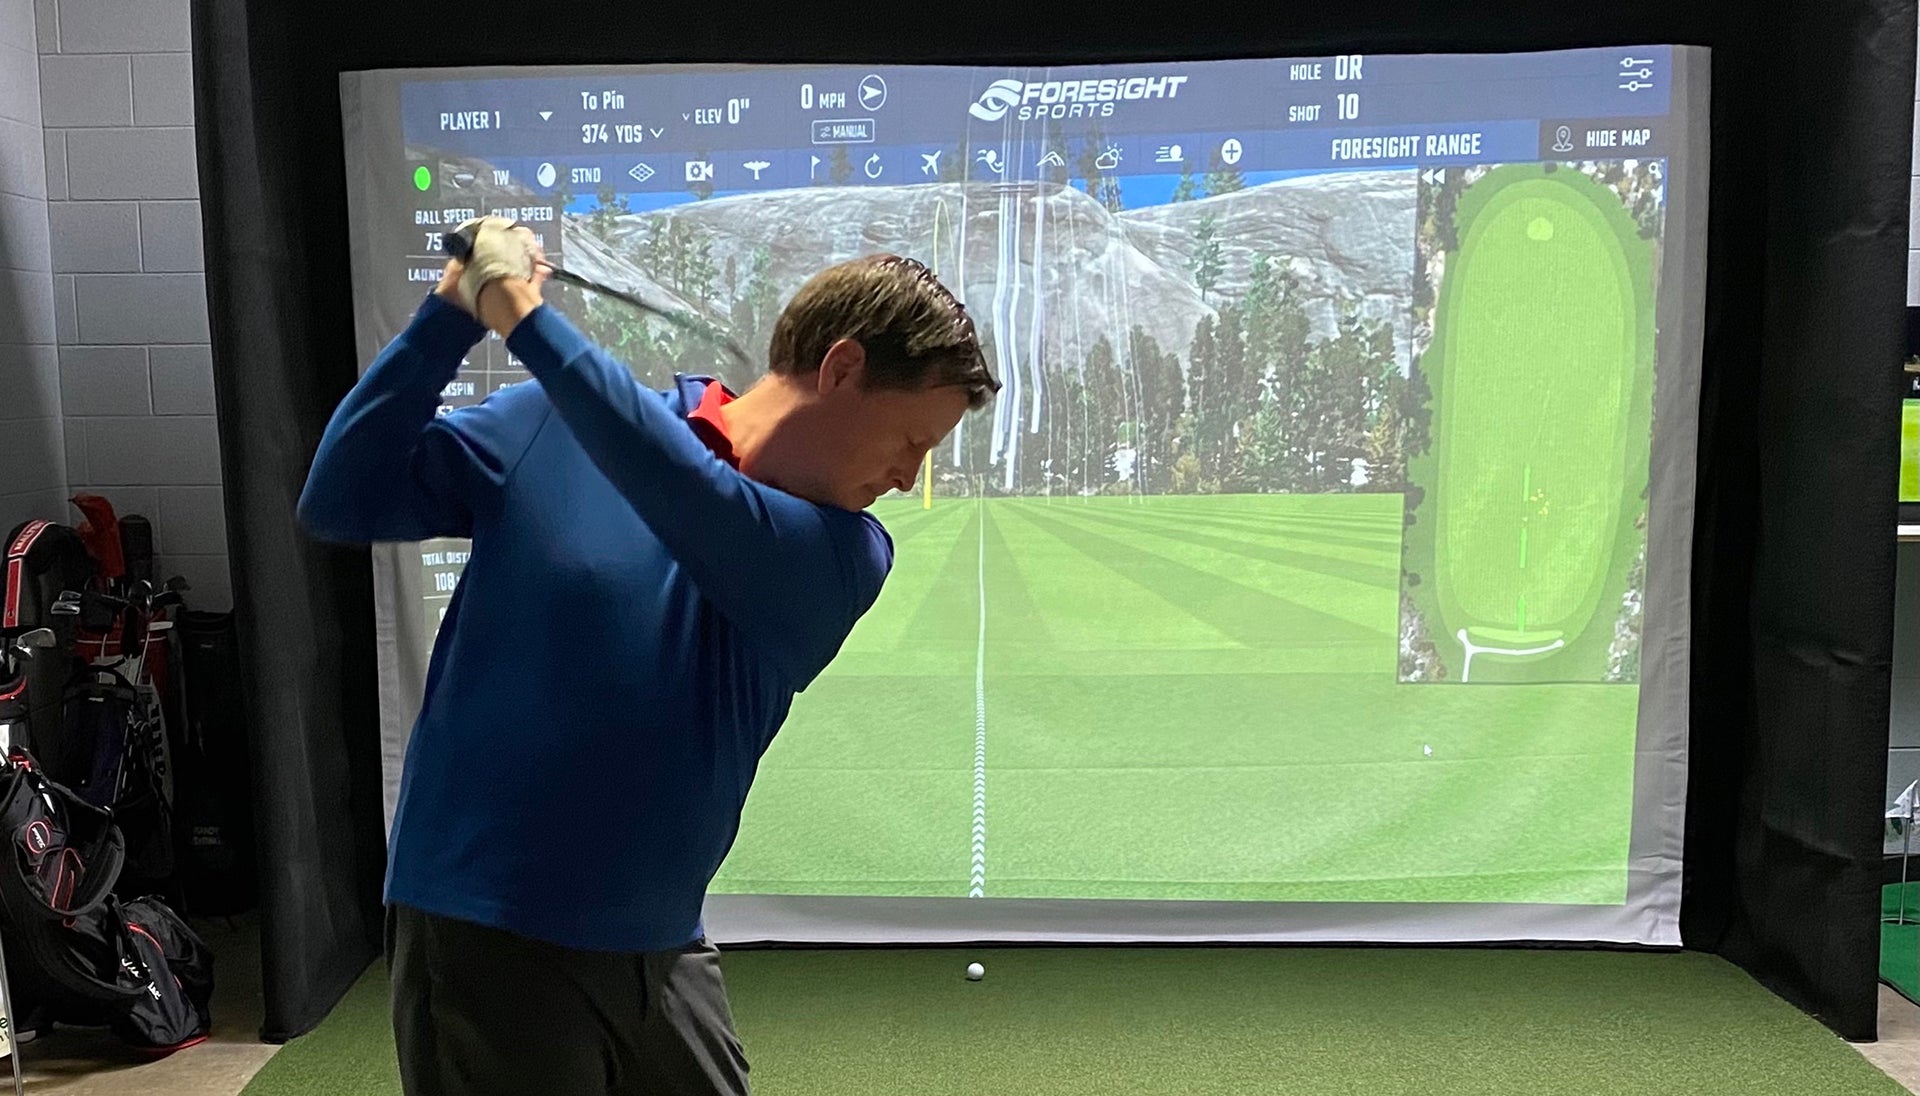 PlayBetter reviewer Marc swinging in an indoor golf simulator